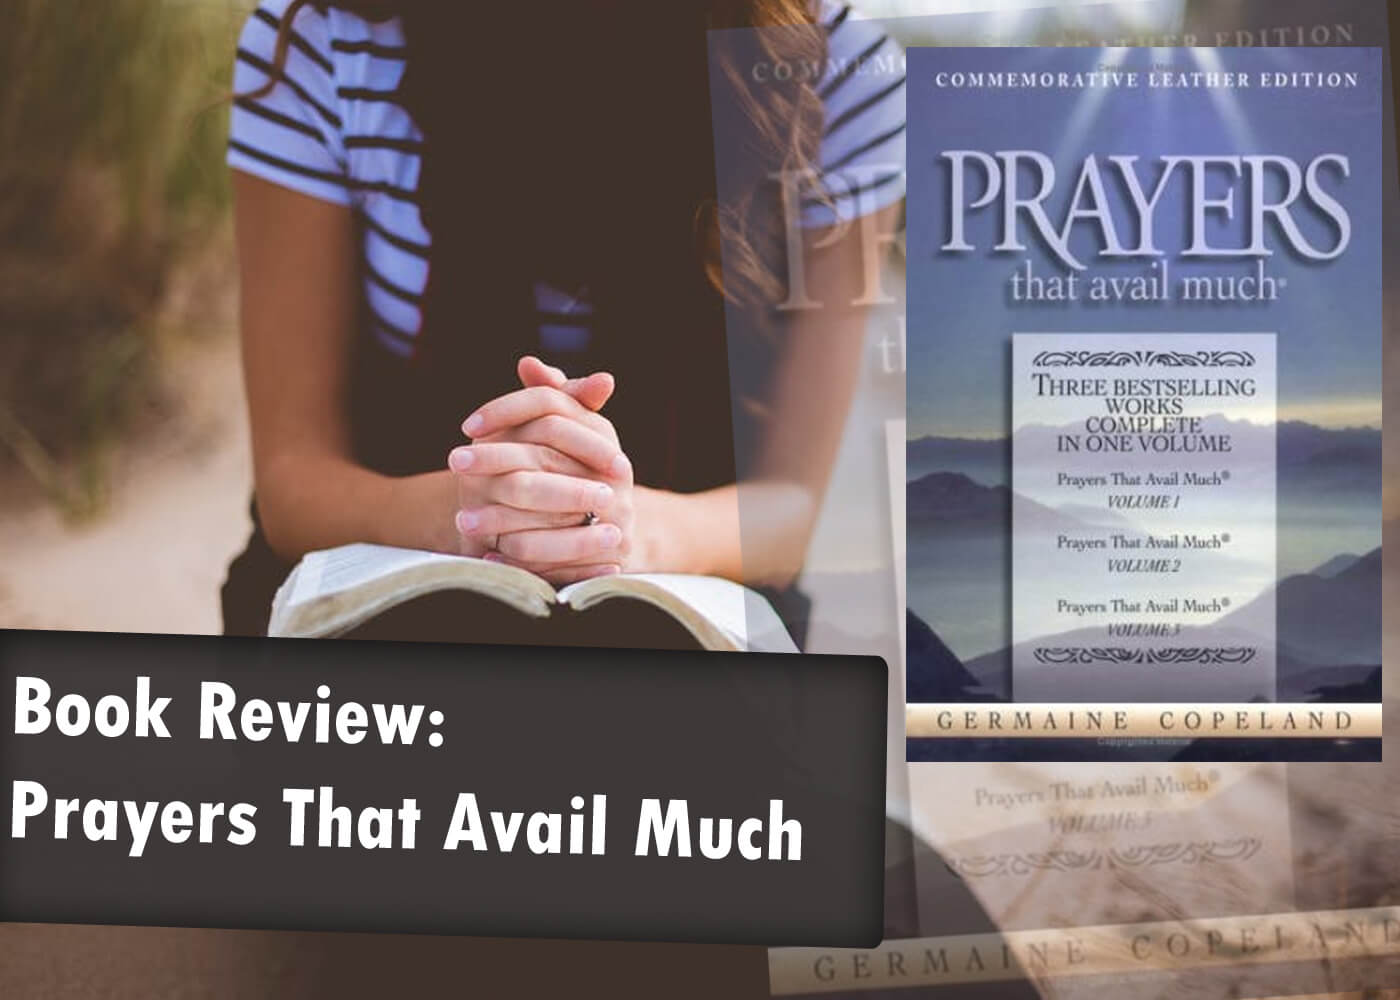 Book Review: Prayers That Avail Much